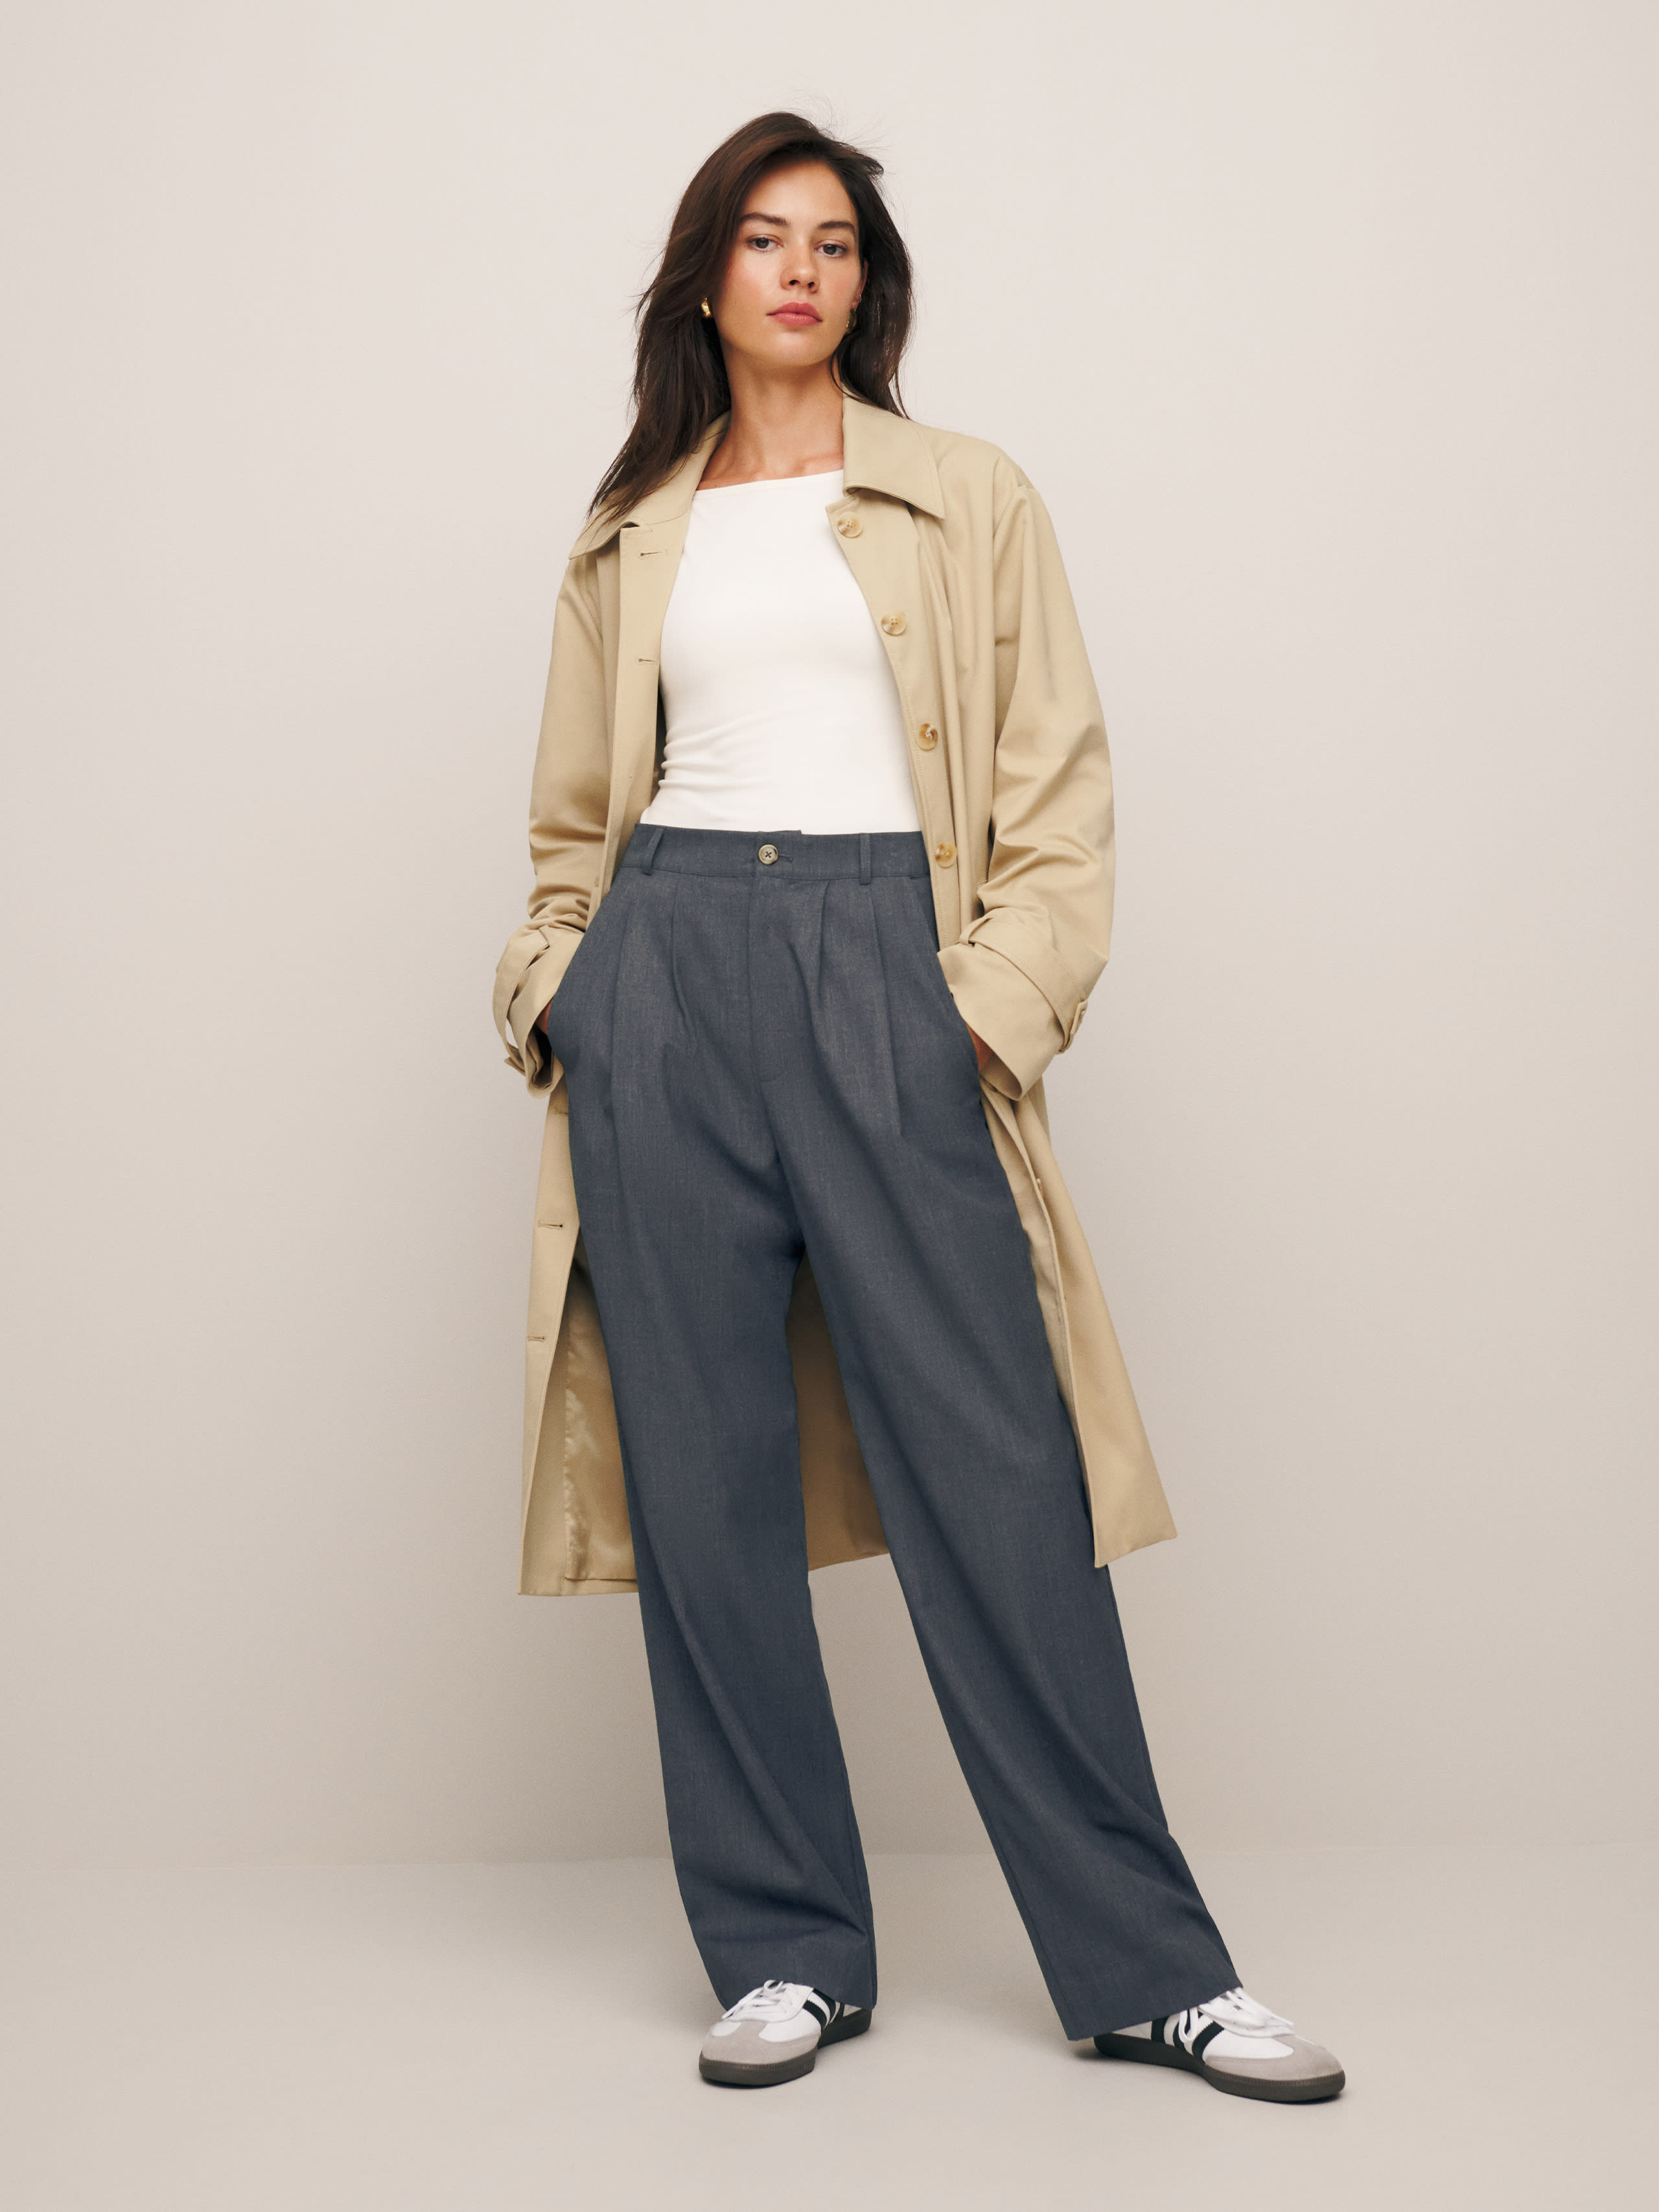 Reformation Petites Mason Pant In Charcoal